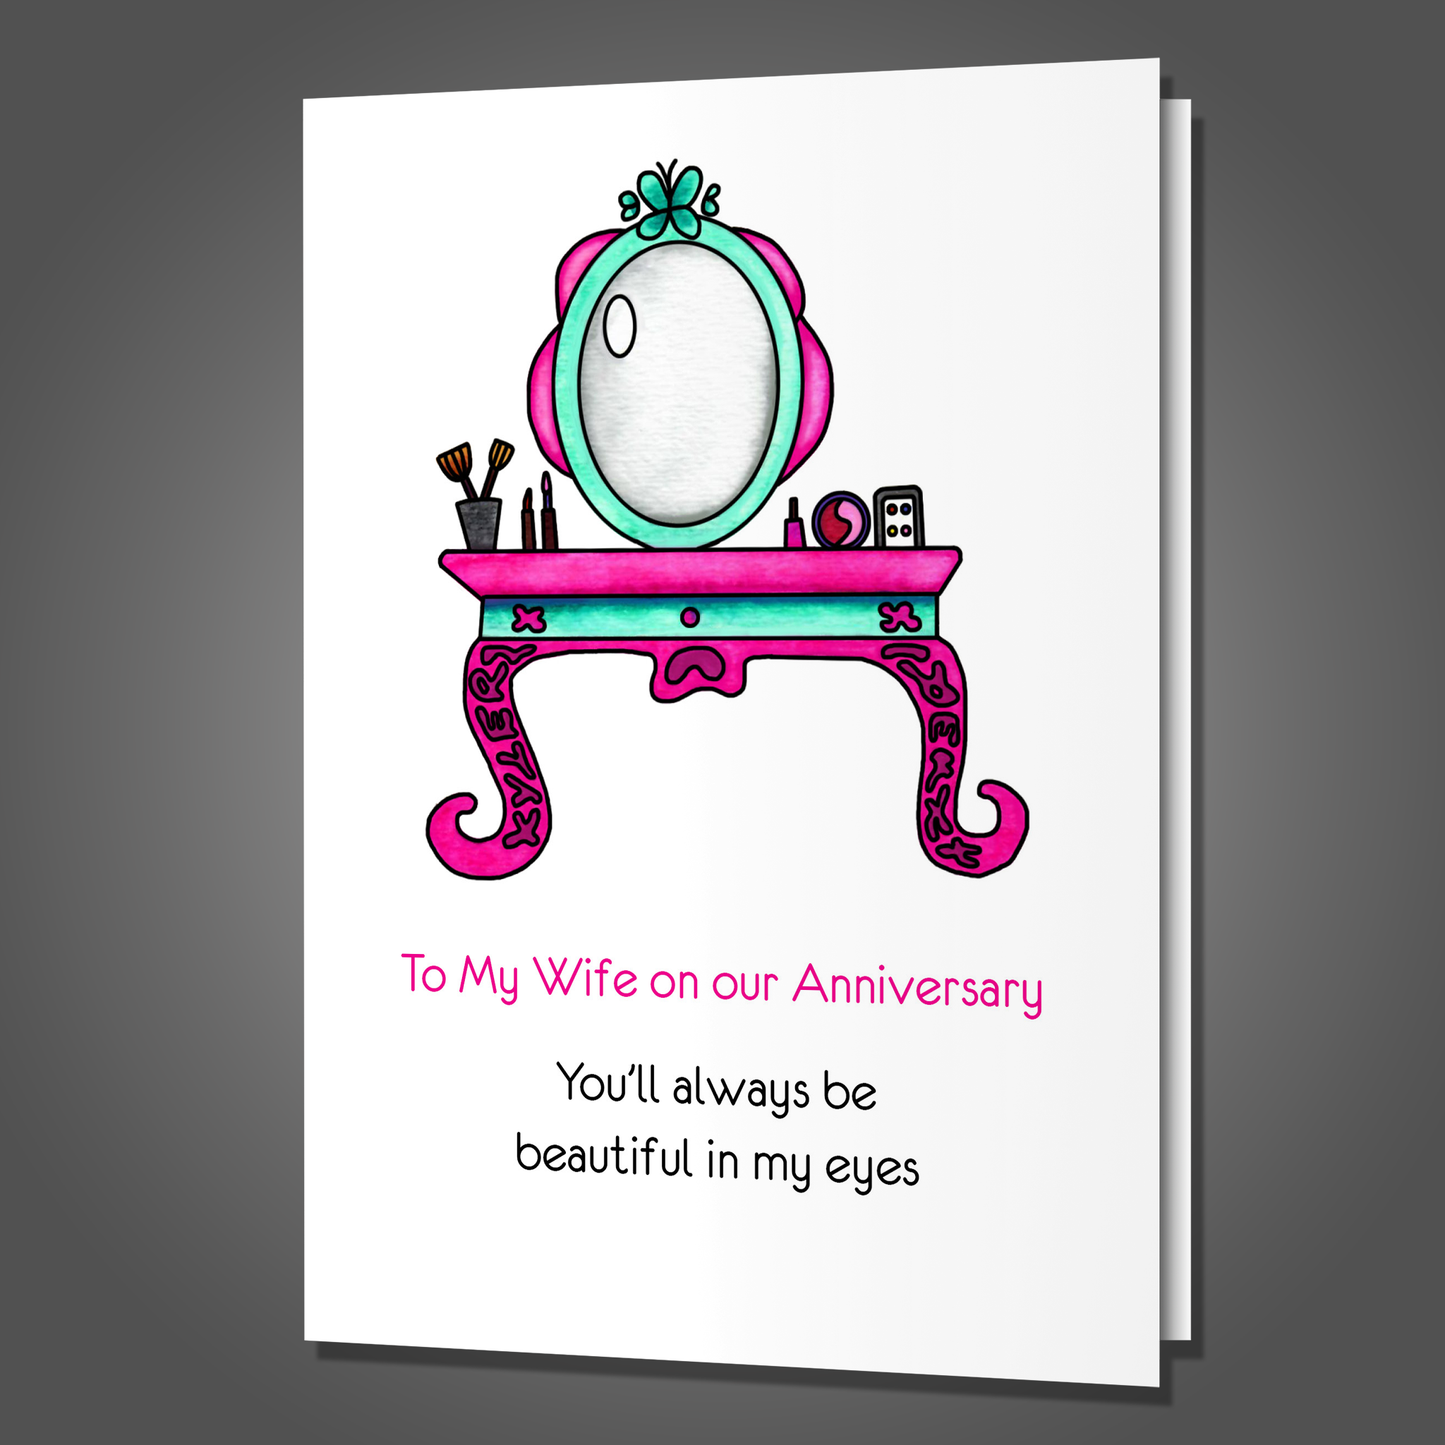 Beautiful Only with Make-Up, Anniversary Card